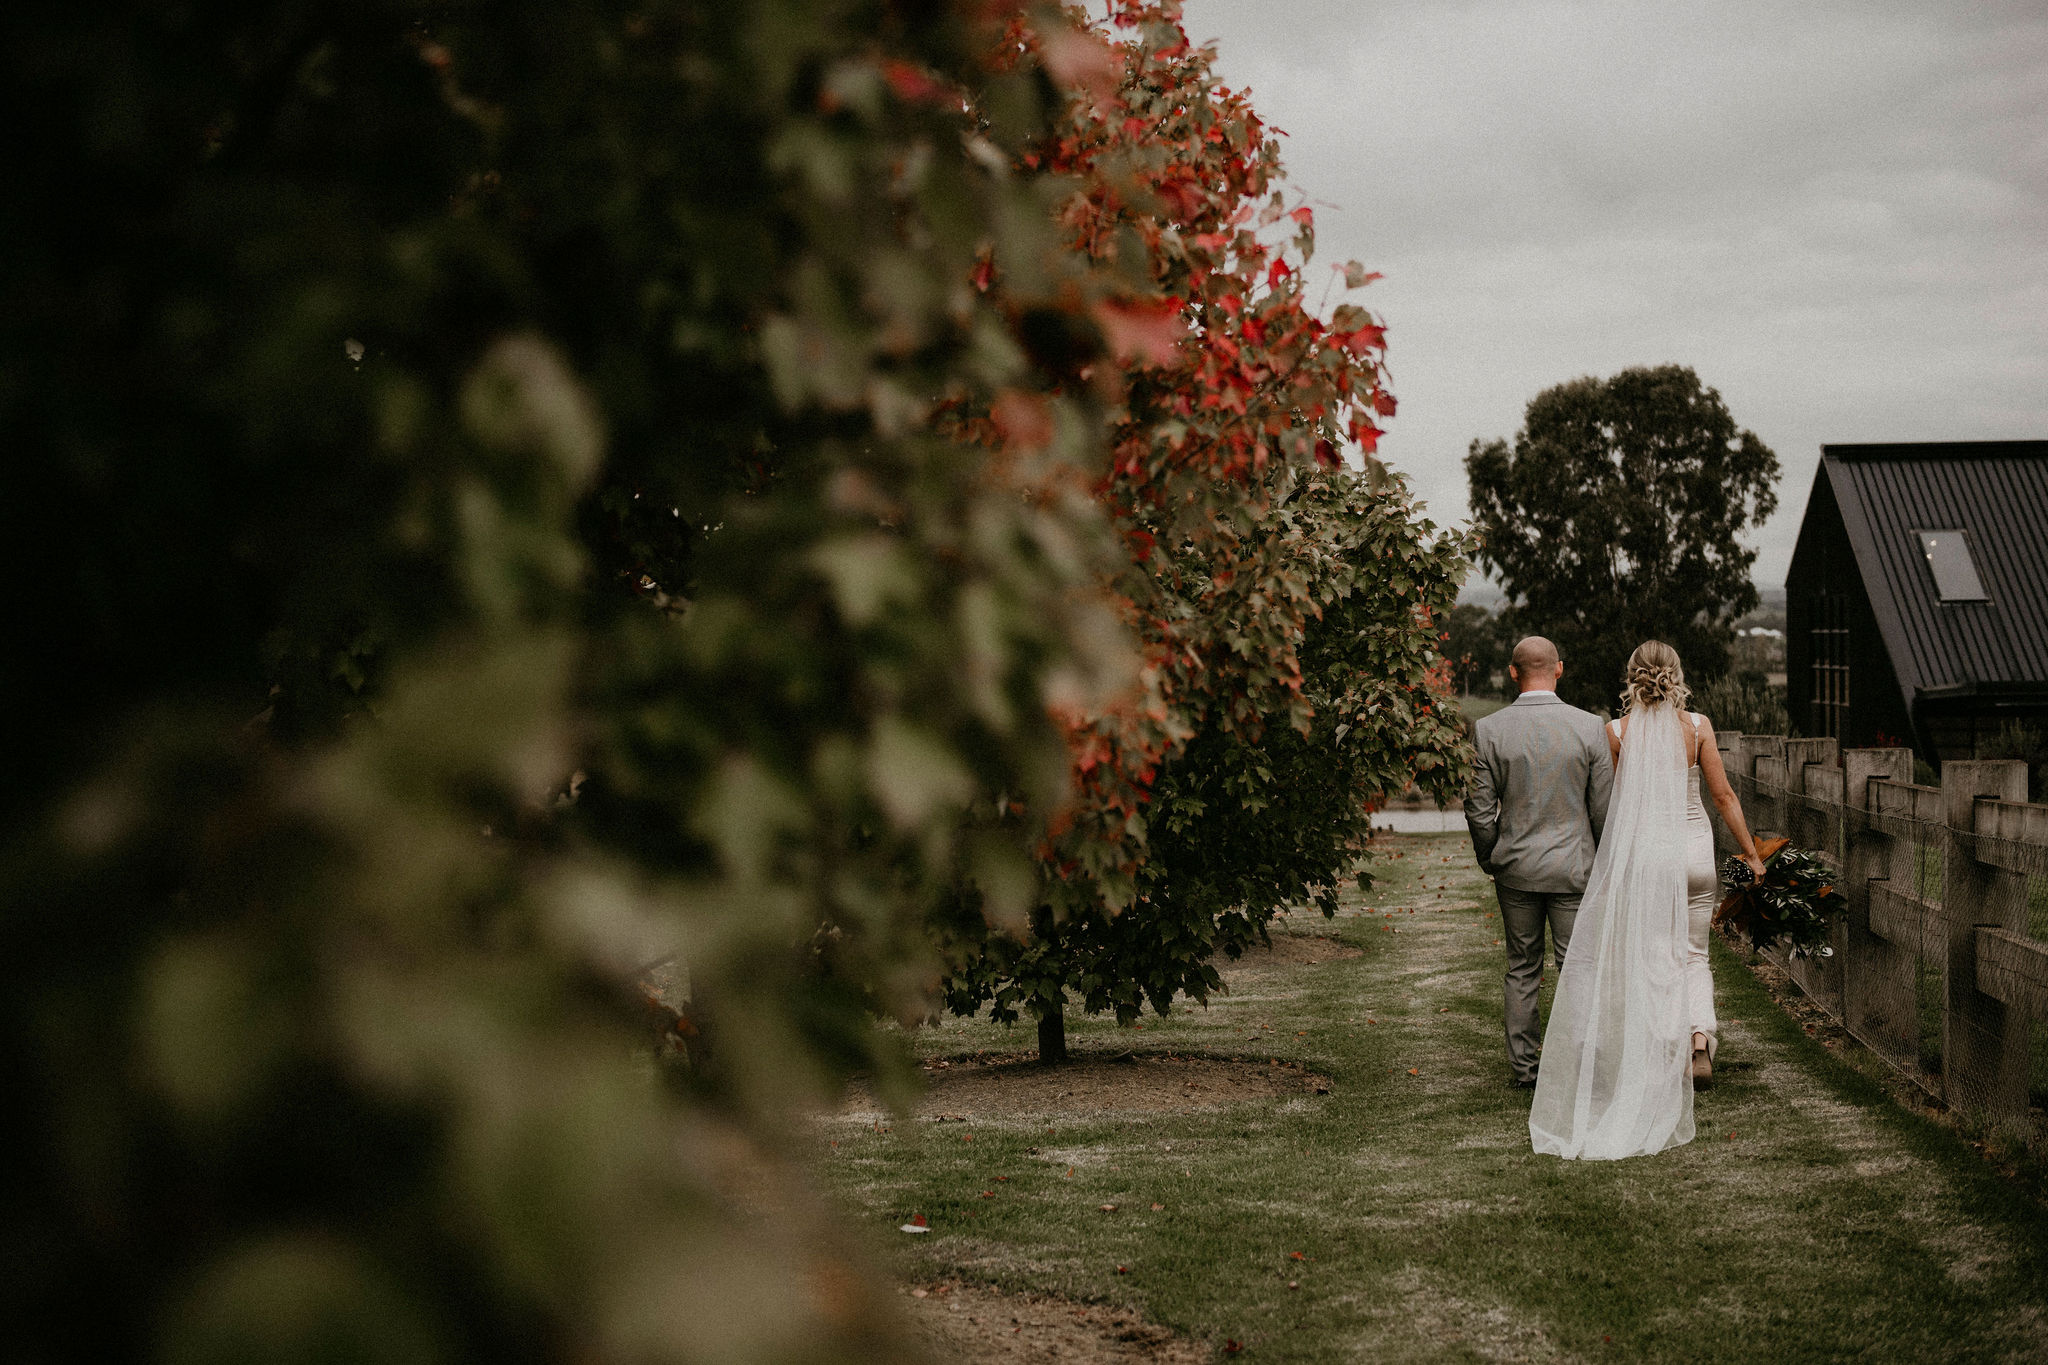 Lets-Elope-Melbourne-Celebrant-Photography-Elopement-Package-Victoria-Sarah-Matler-Photography-Zonzo-Estate-Yarra-Valley-Winery-Intimate-Wedding-Photos-19